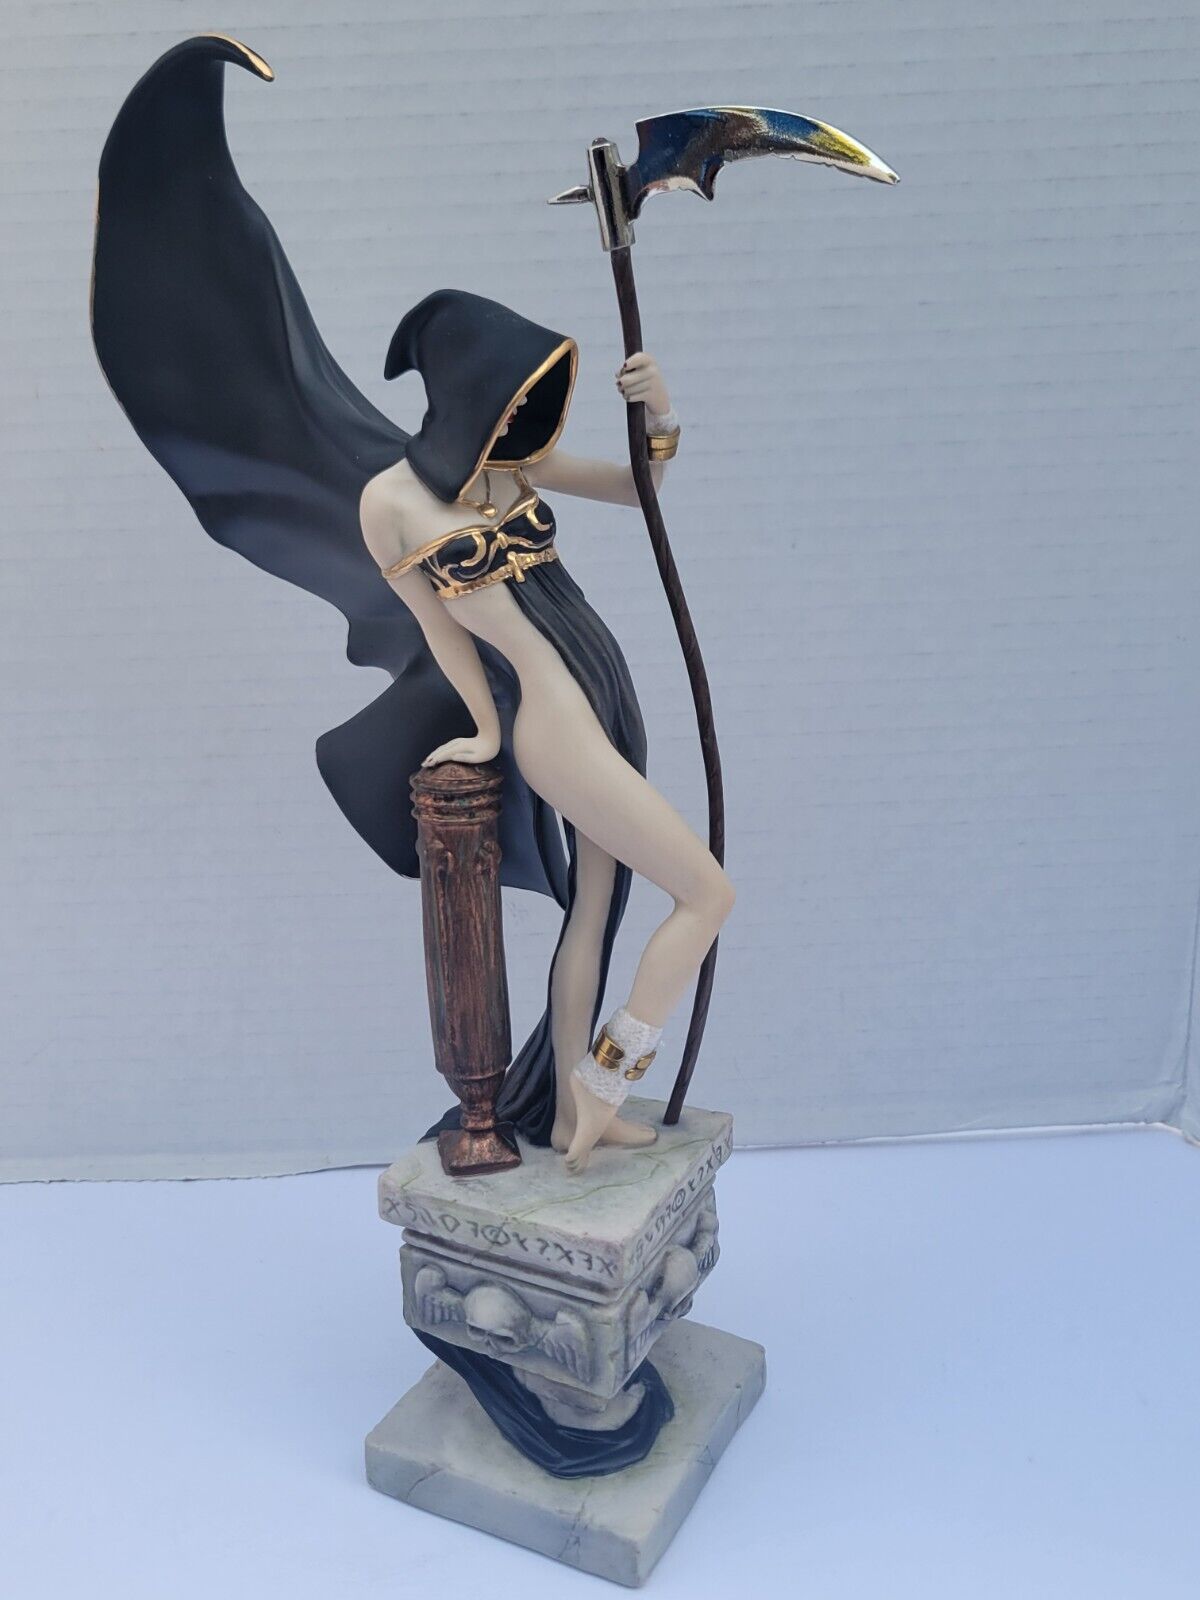 Franklin Mint Mistress of Death by Brom Limited Edition 0162/9500